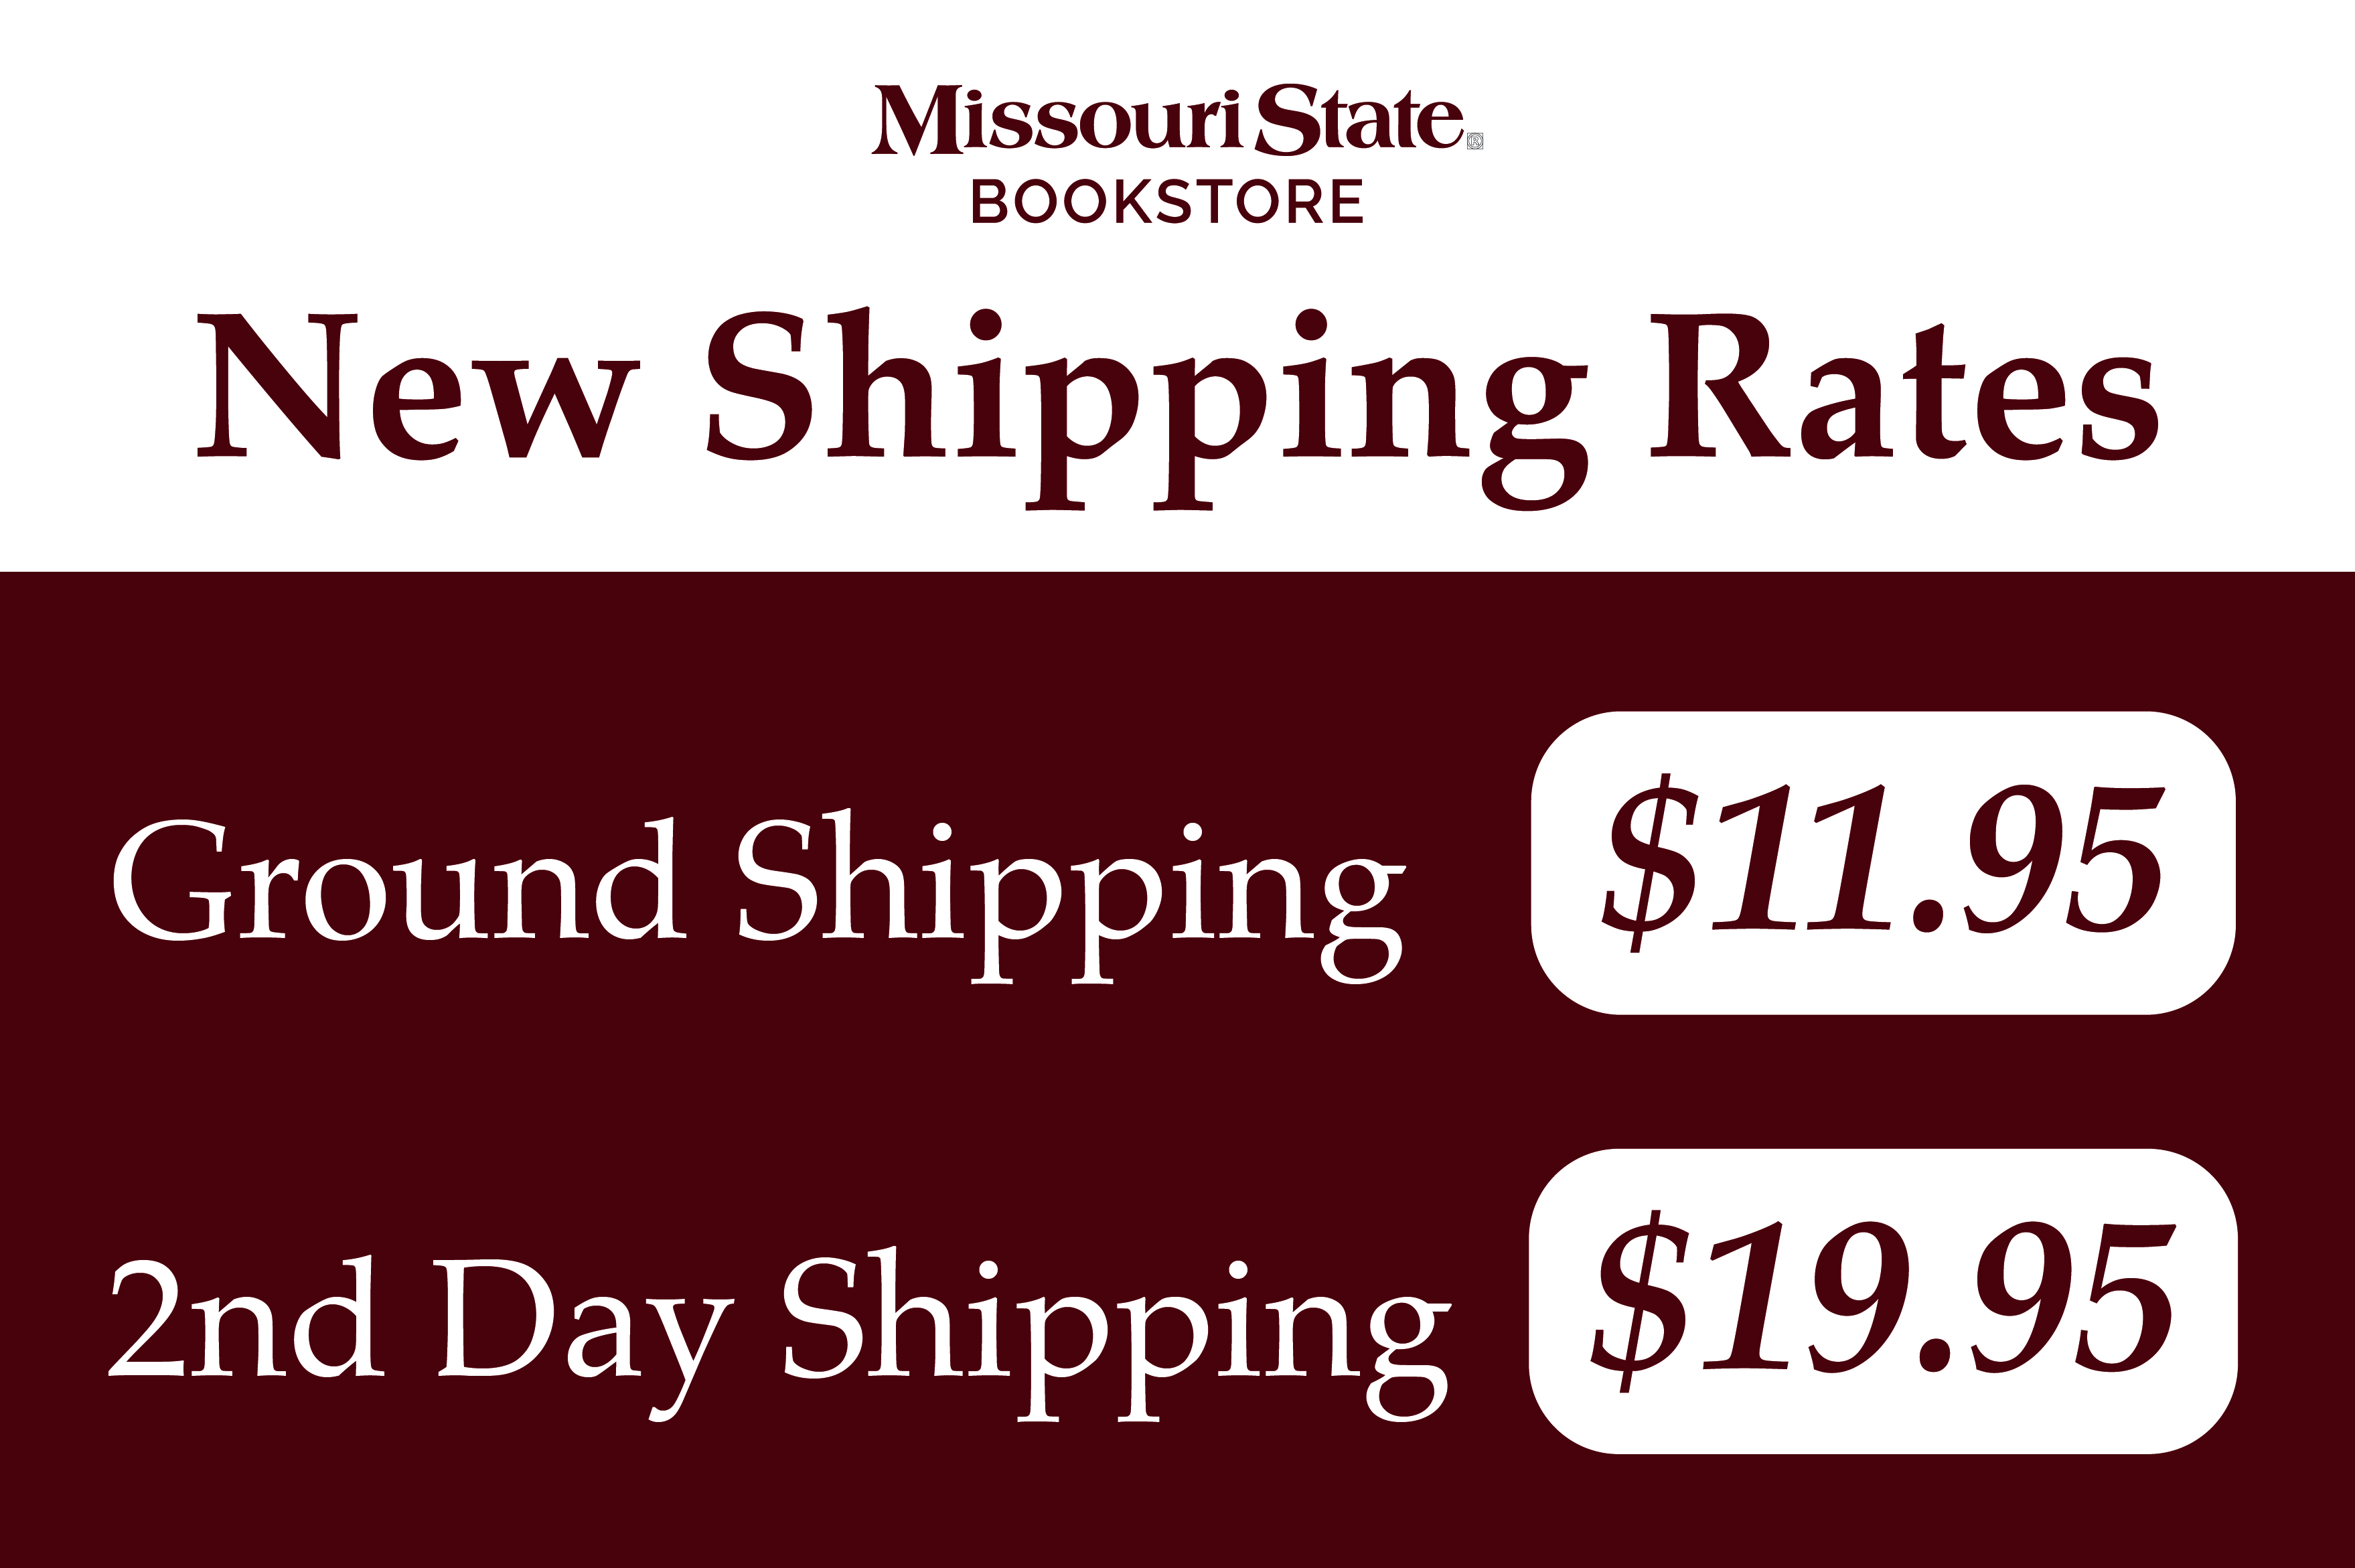 Missouri State Bookstore New Shipping Rates. Ground Shipping $11.95.  2nd Day Shipping $19.95